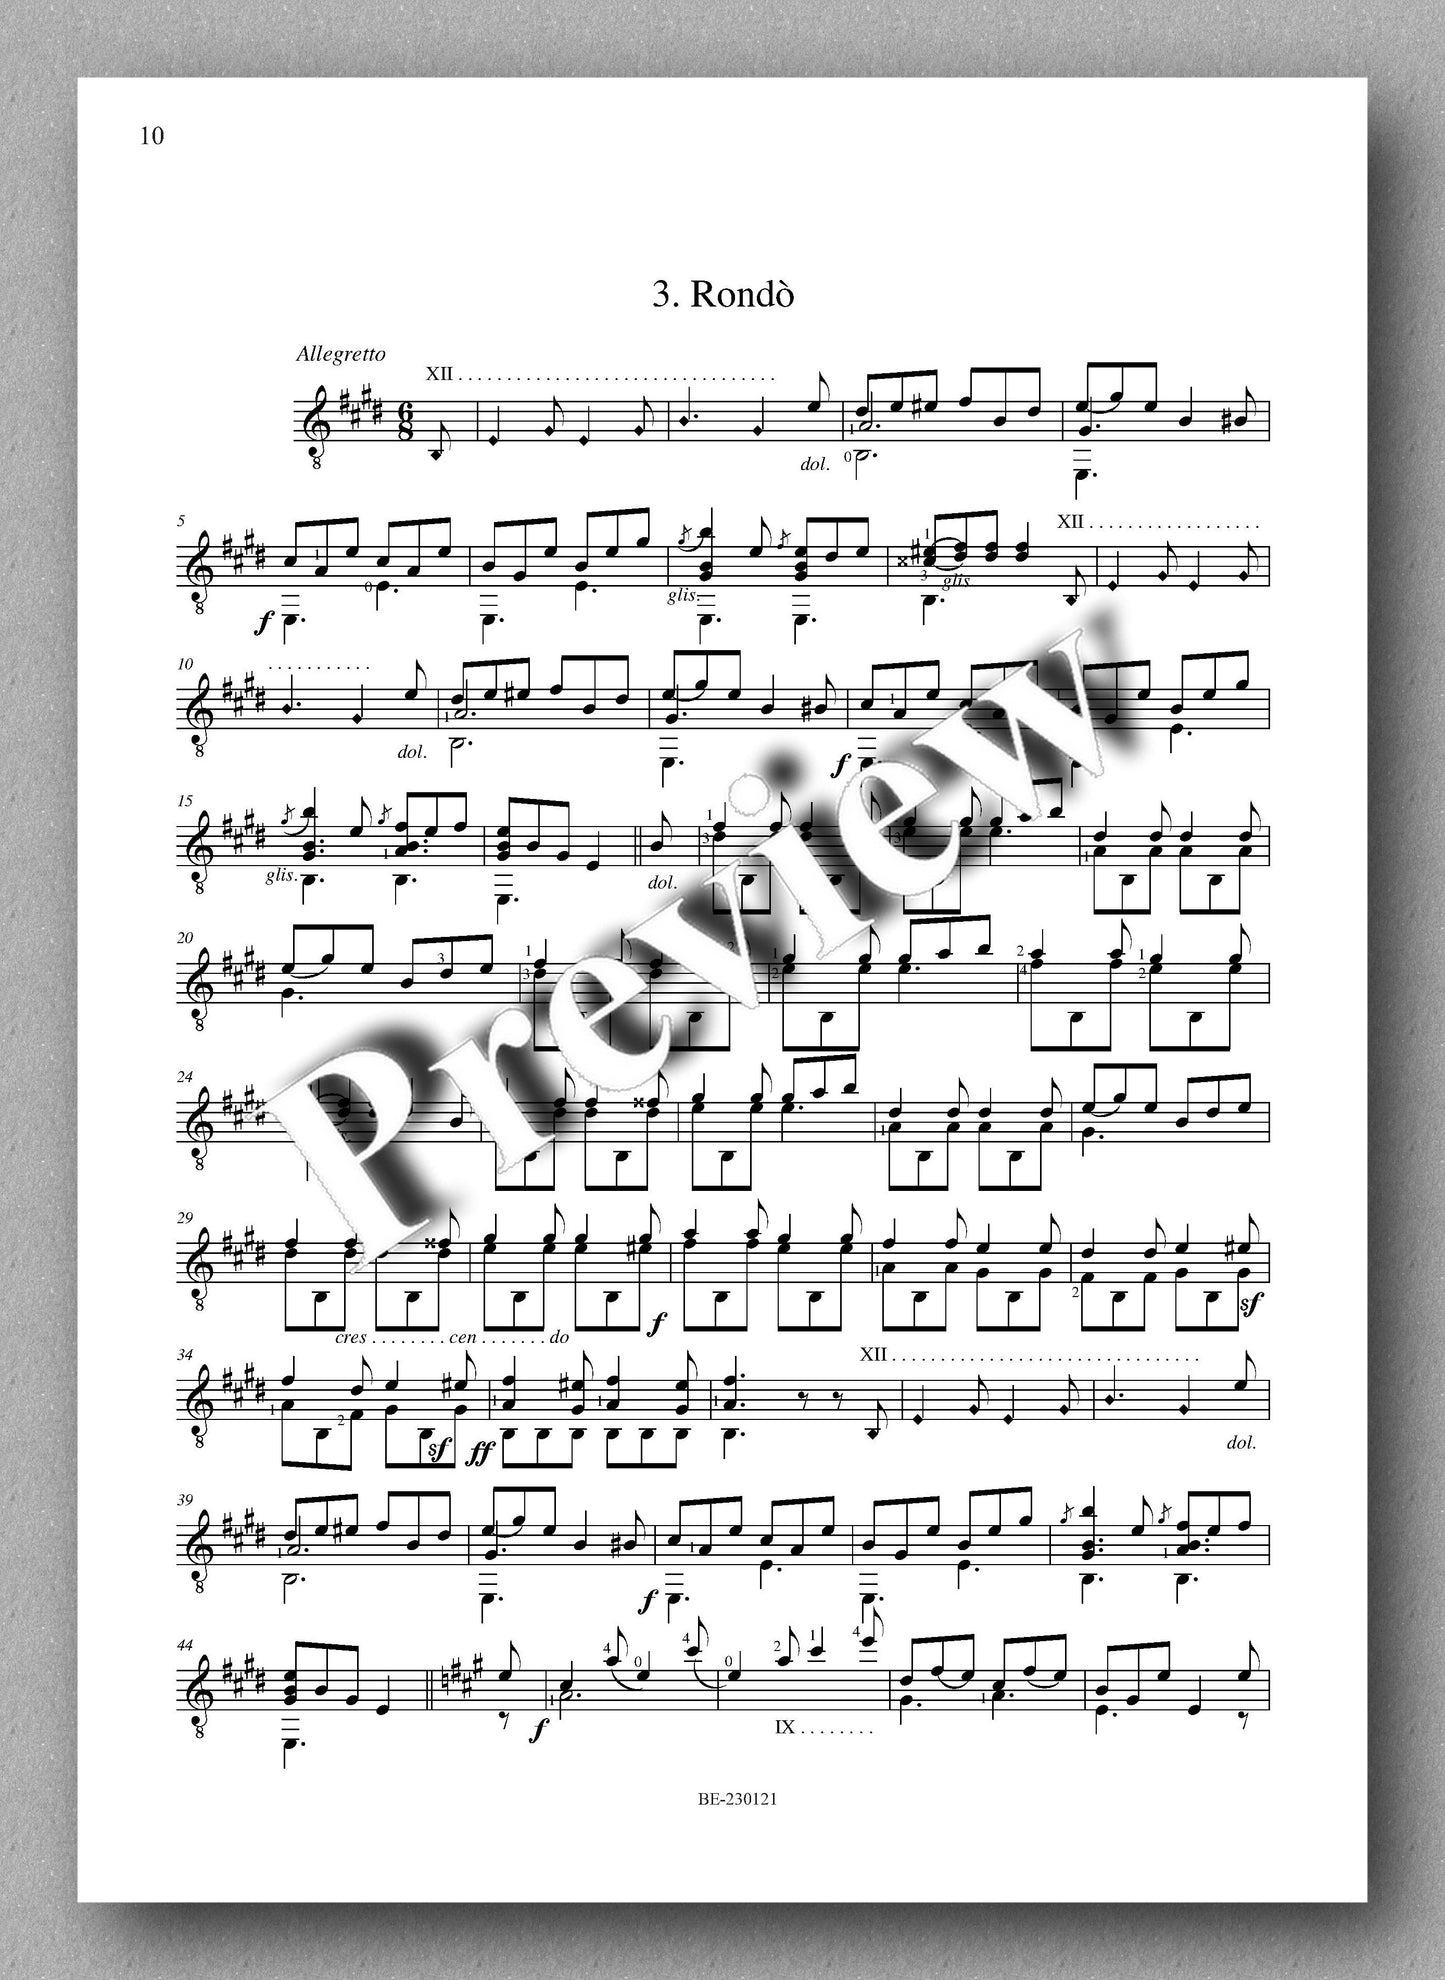 Molino, Collected Works for Guitar Solo, Vol. 33 - preview of the music score 2